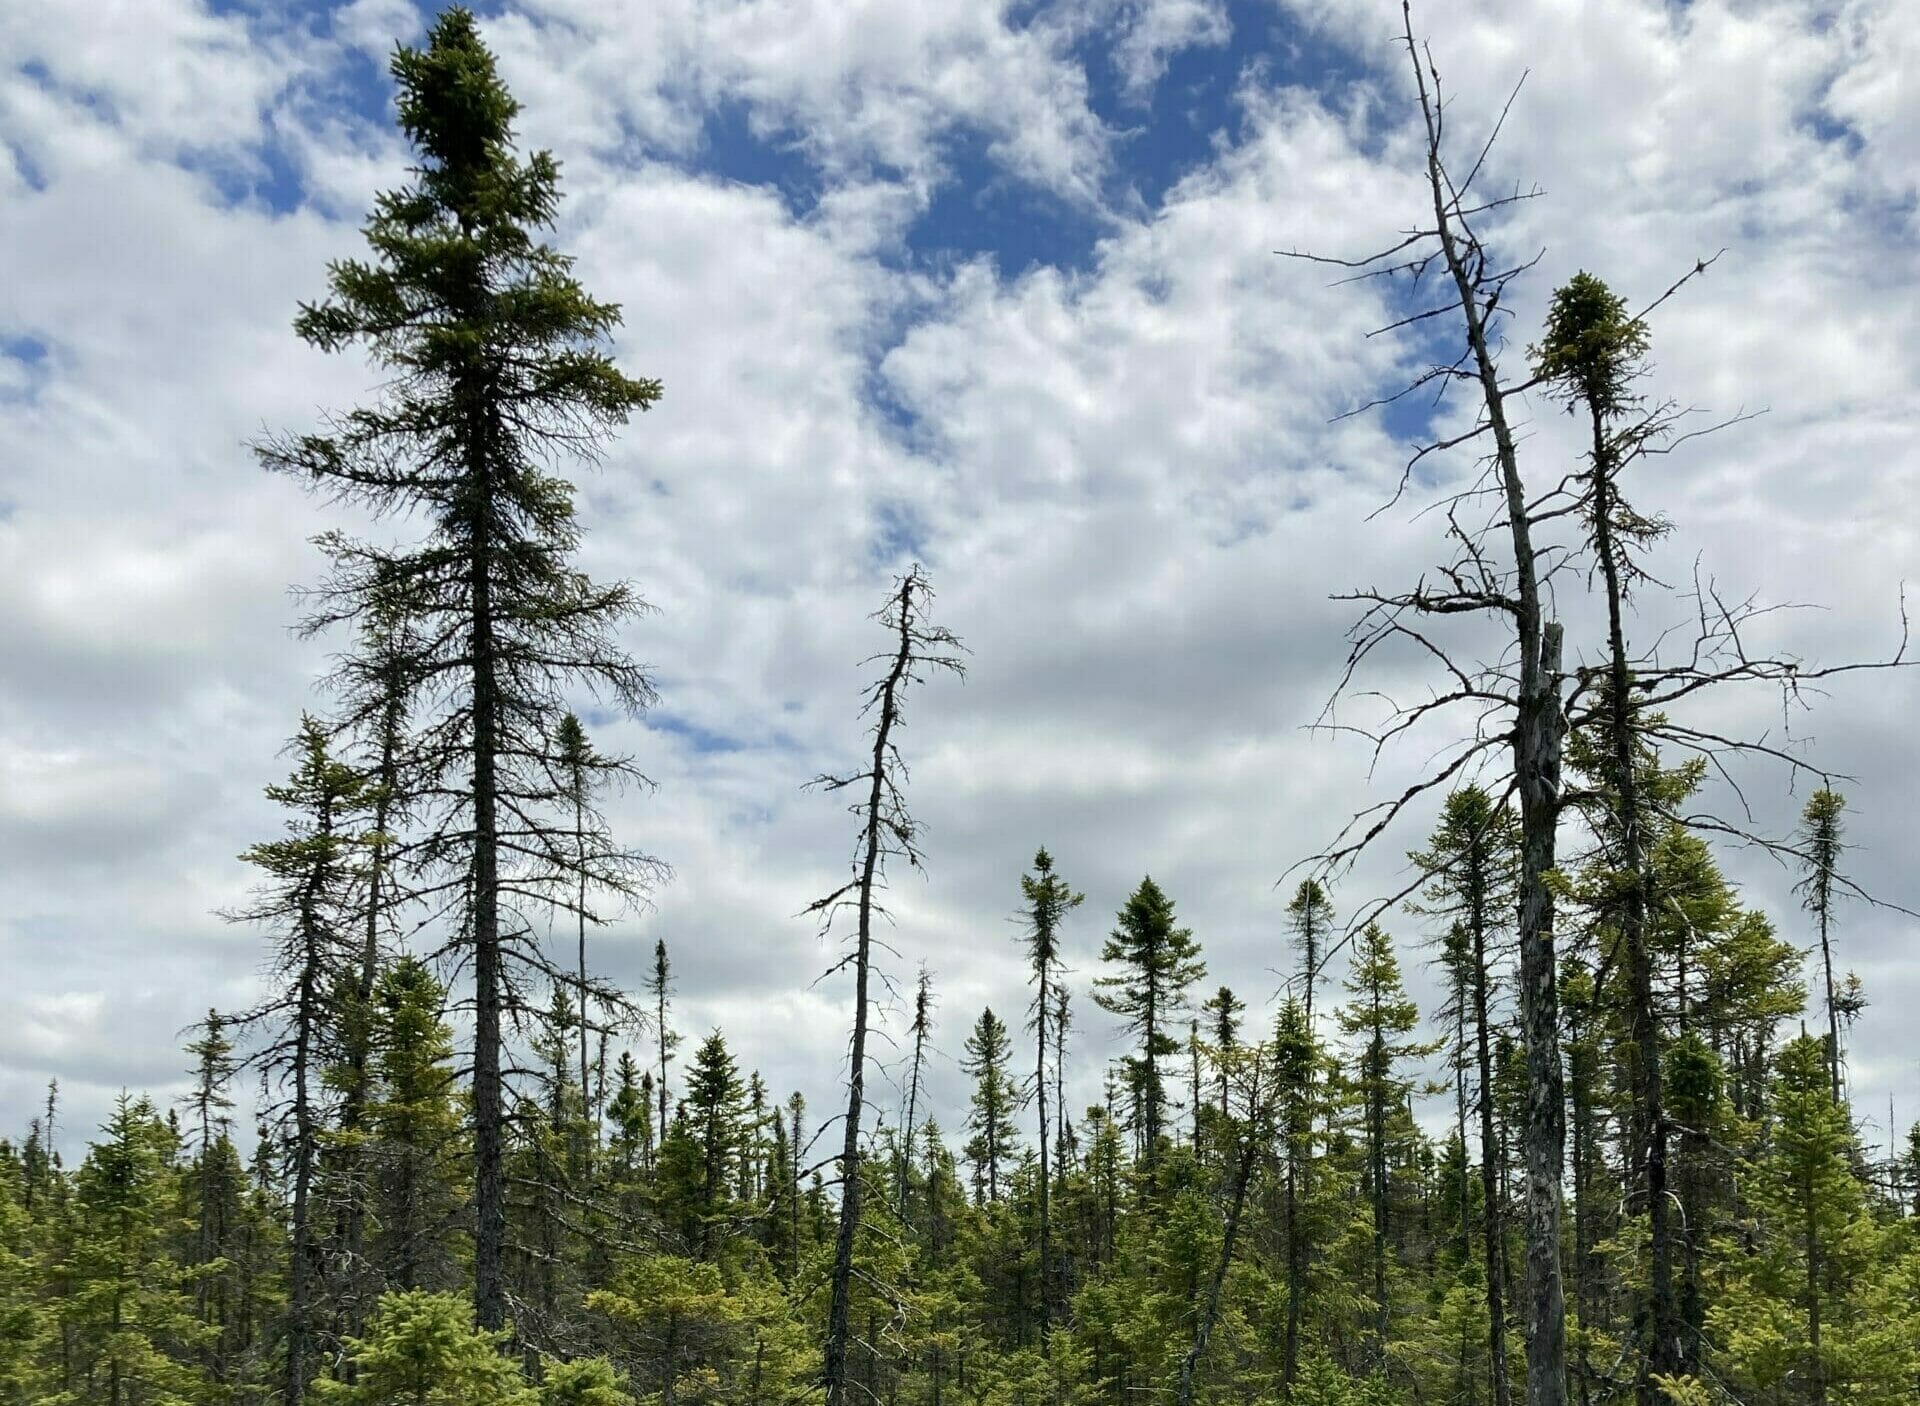 Photo of a mixed age forest with a diversity of trees and moss. A blue sky filled with white clouds in the background.